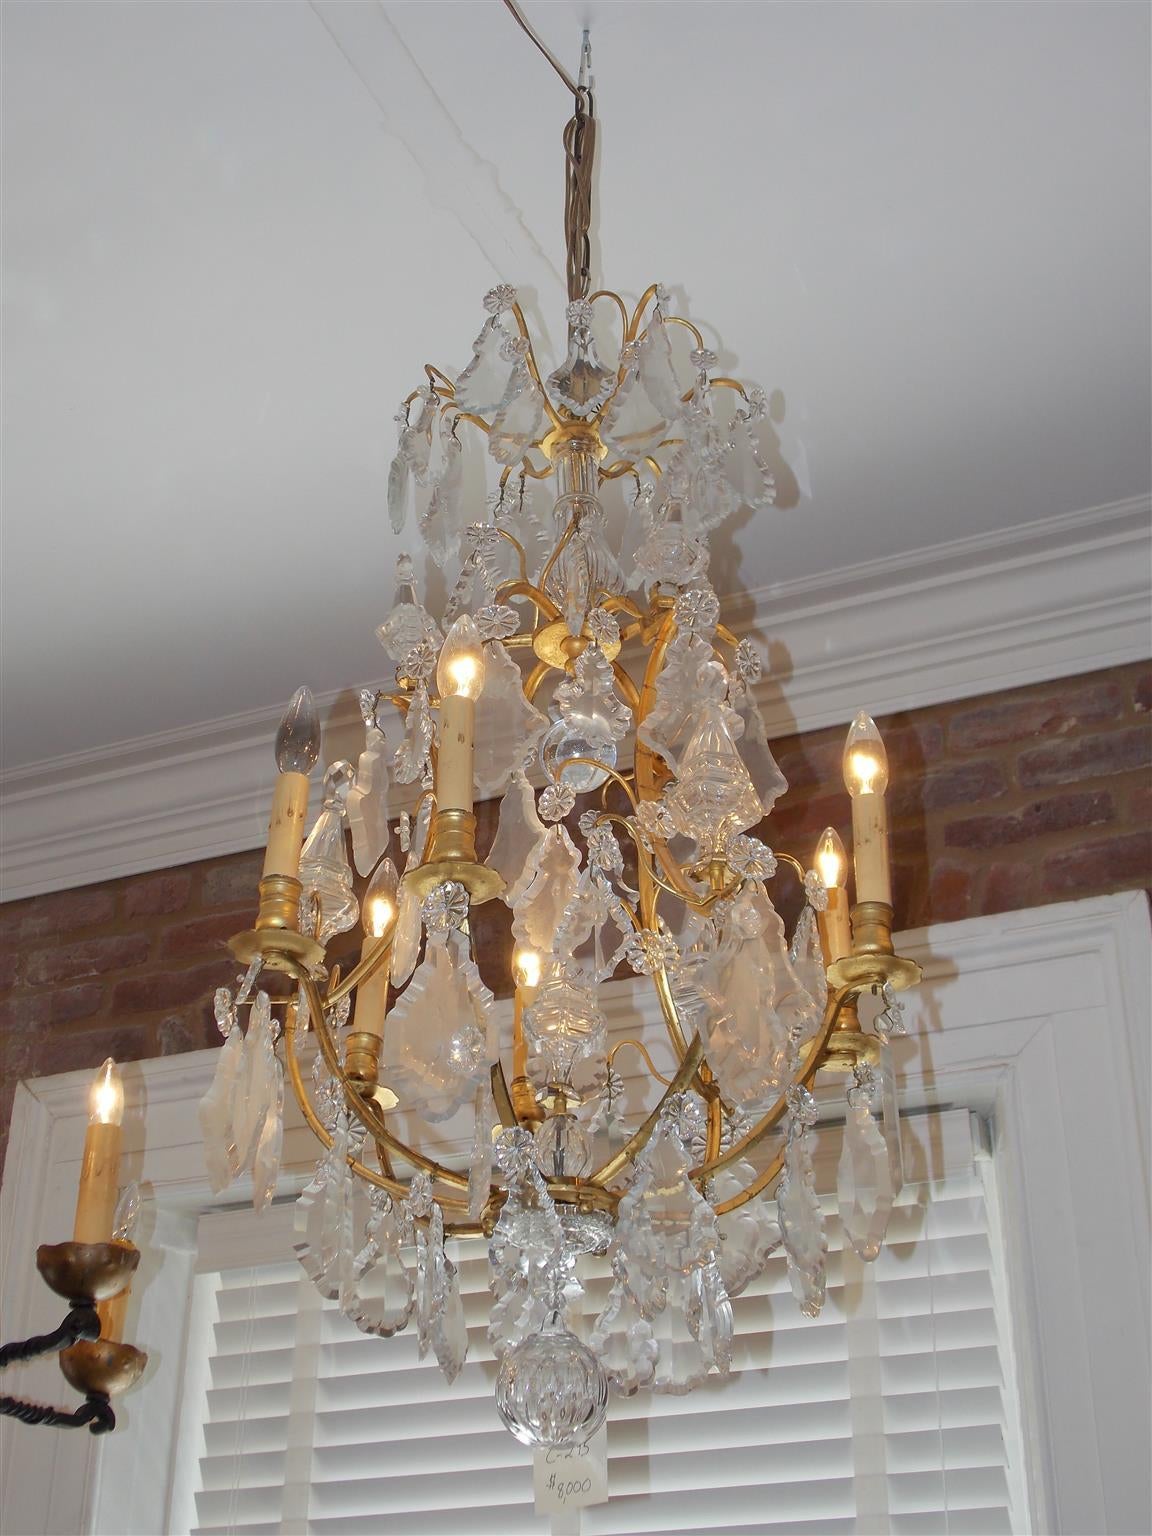 French gilt bronze and crystal six light chandelier with faceted crystal spheres, interior fluted column, and terminating with lower cut crystal ball.  Originally candle powered and has been electrified.  Mid 19th Century